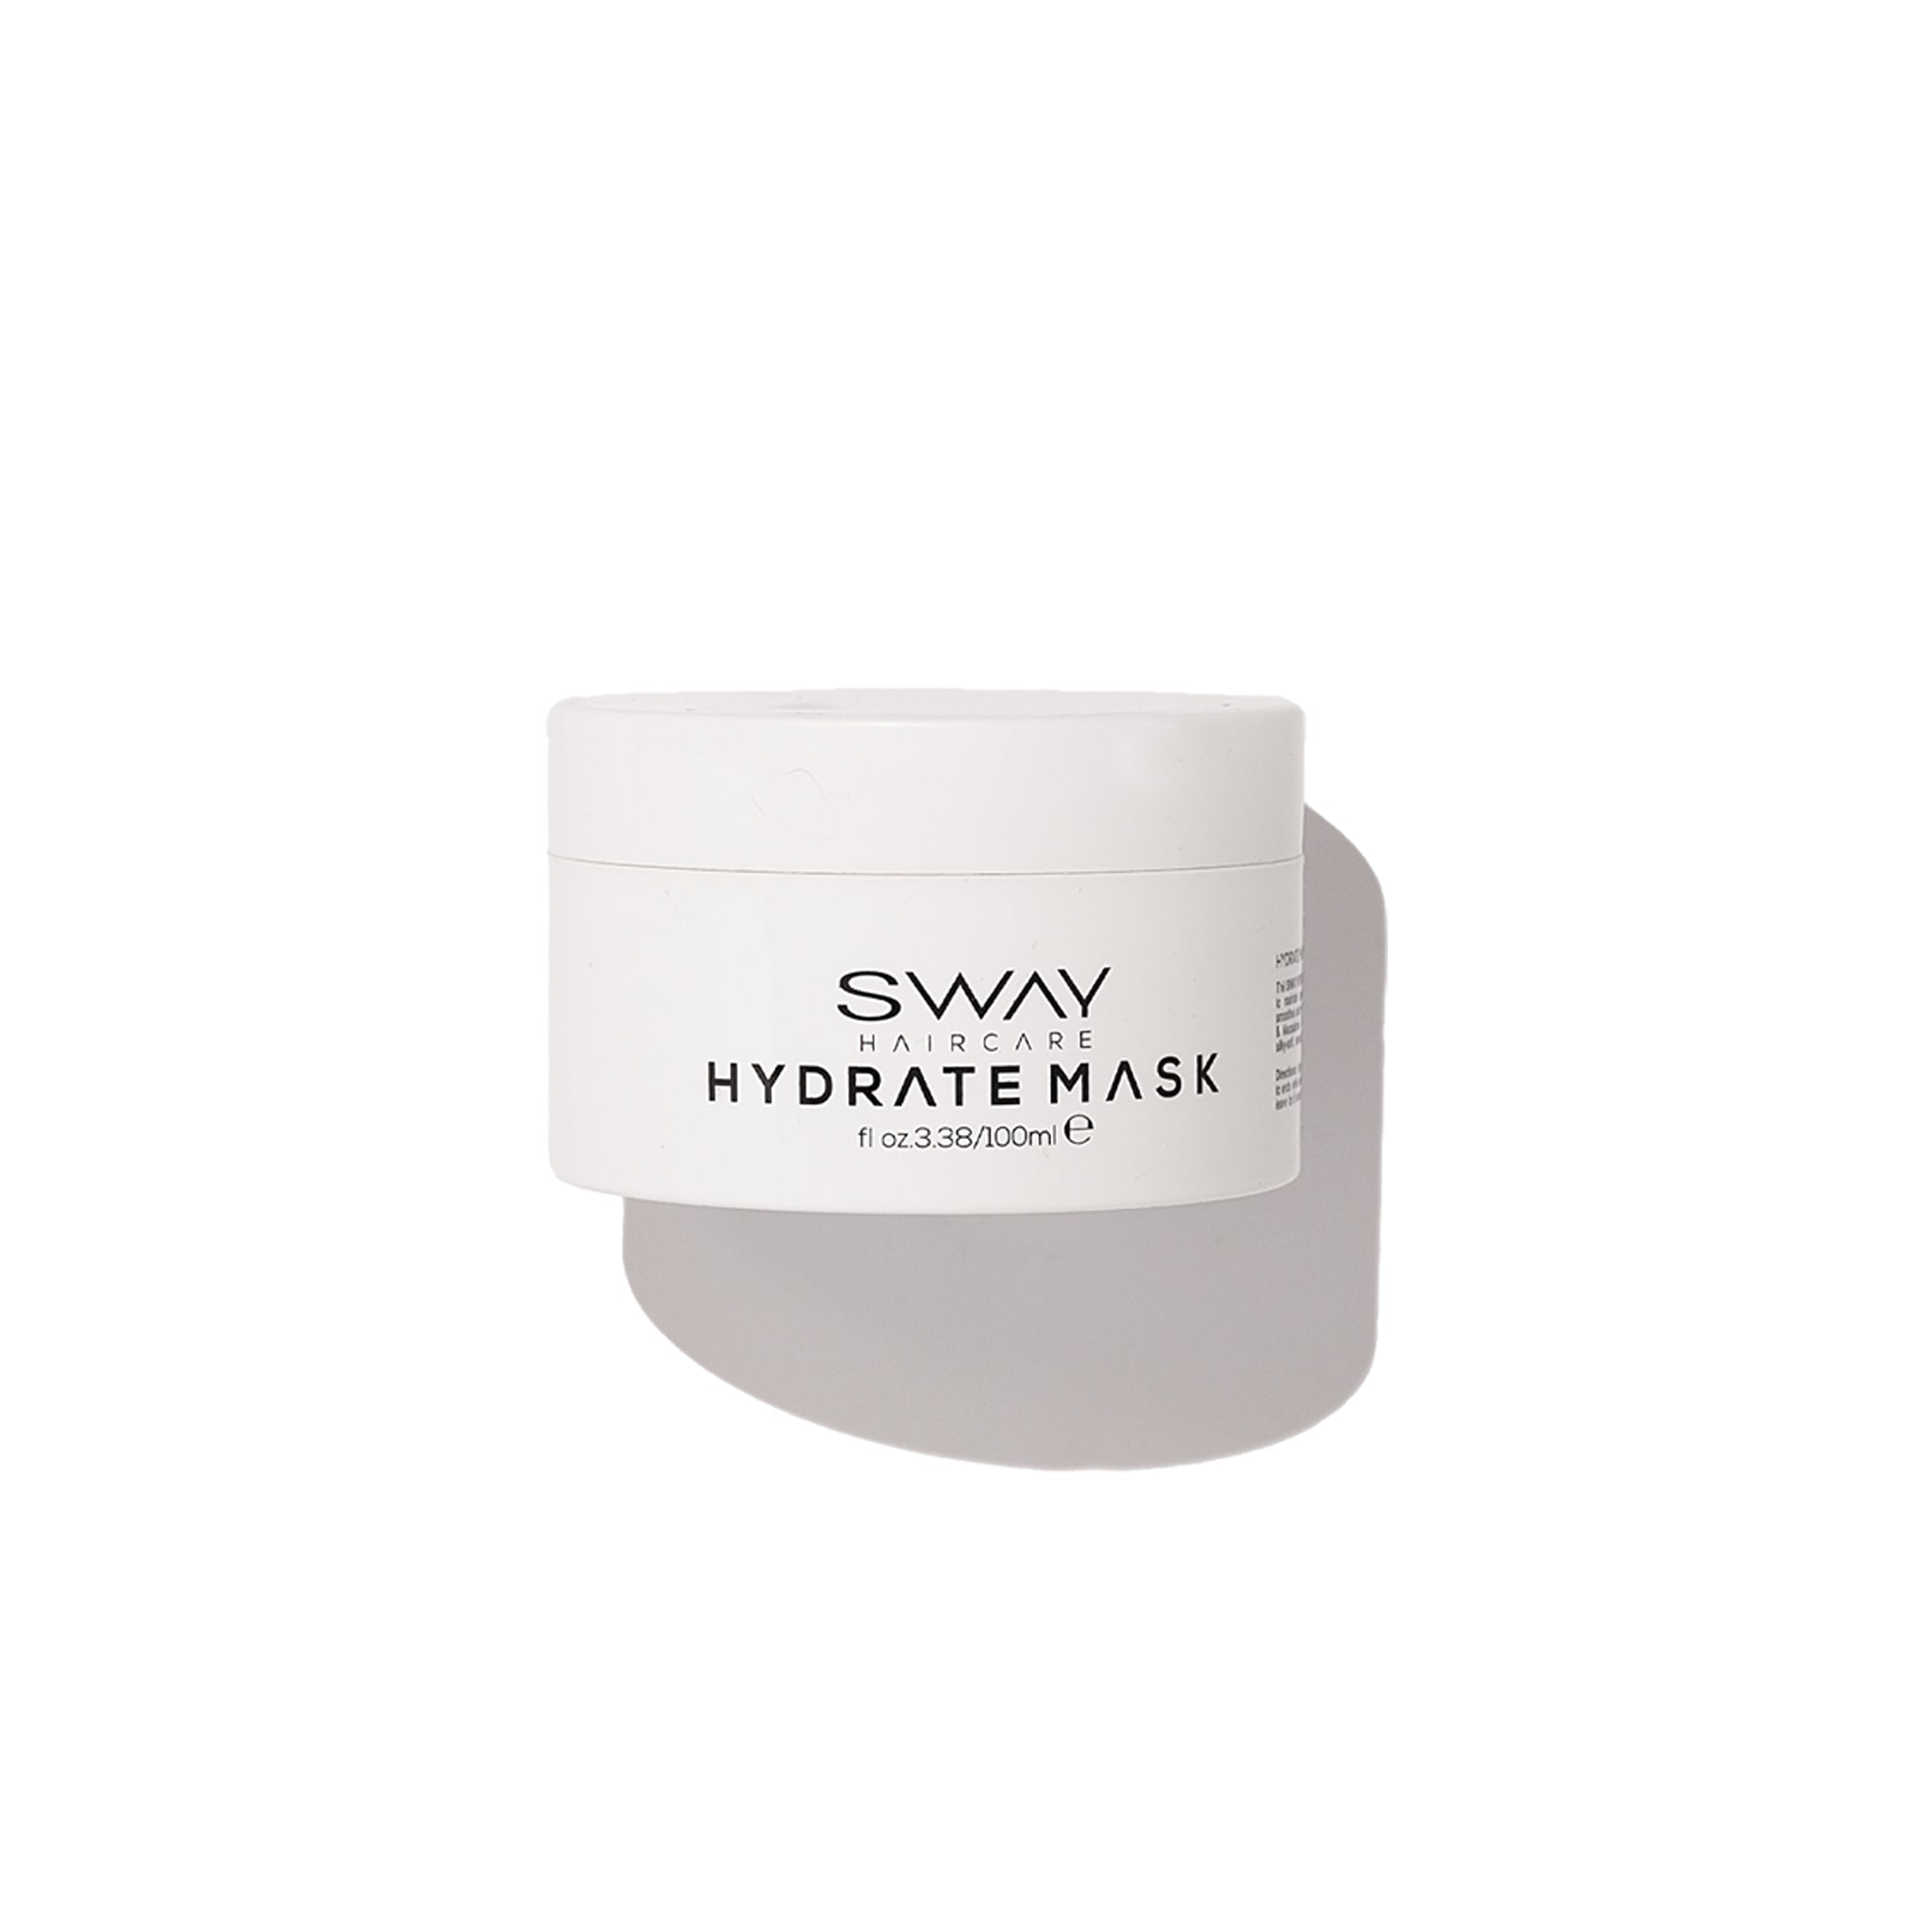 Hydrate Mask: A luxurious formula for all hair types, delivering ultimate moisture and vitality. Repairs, strengthens, and restores natural shine